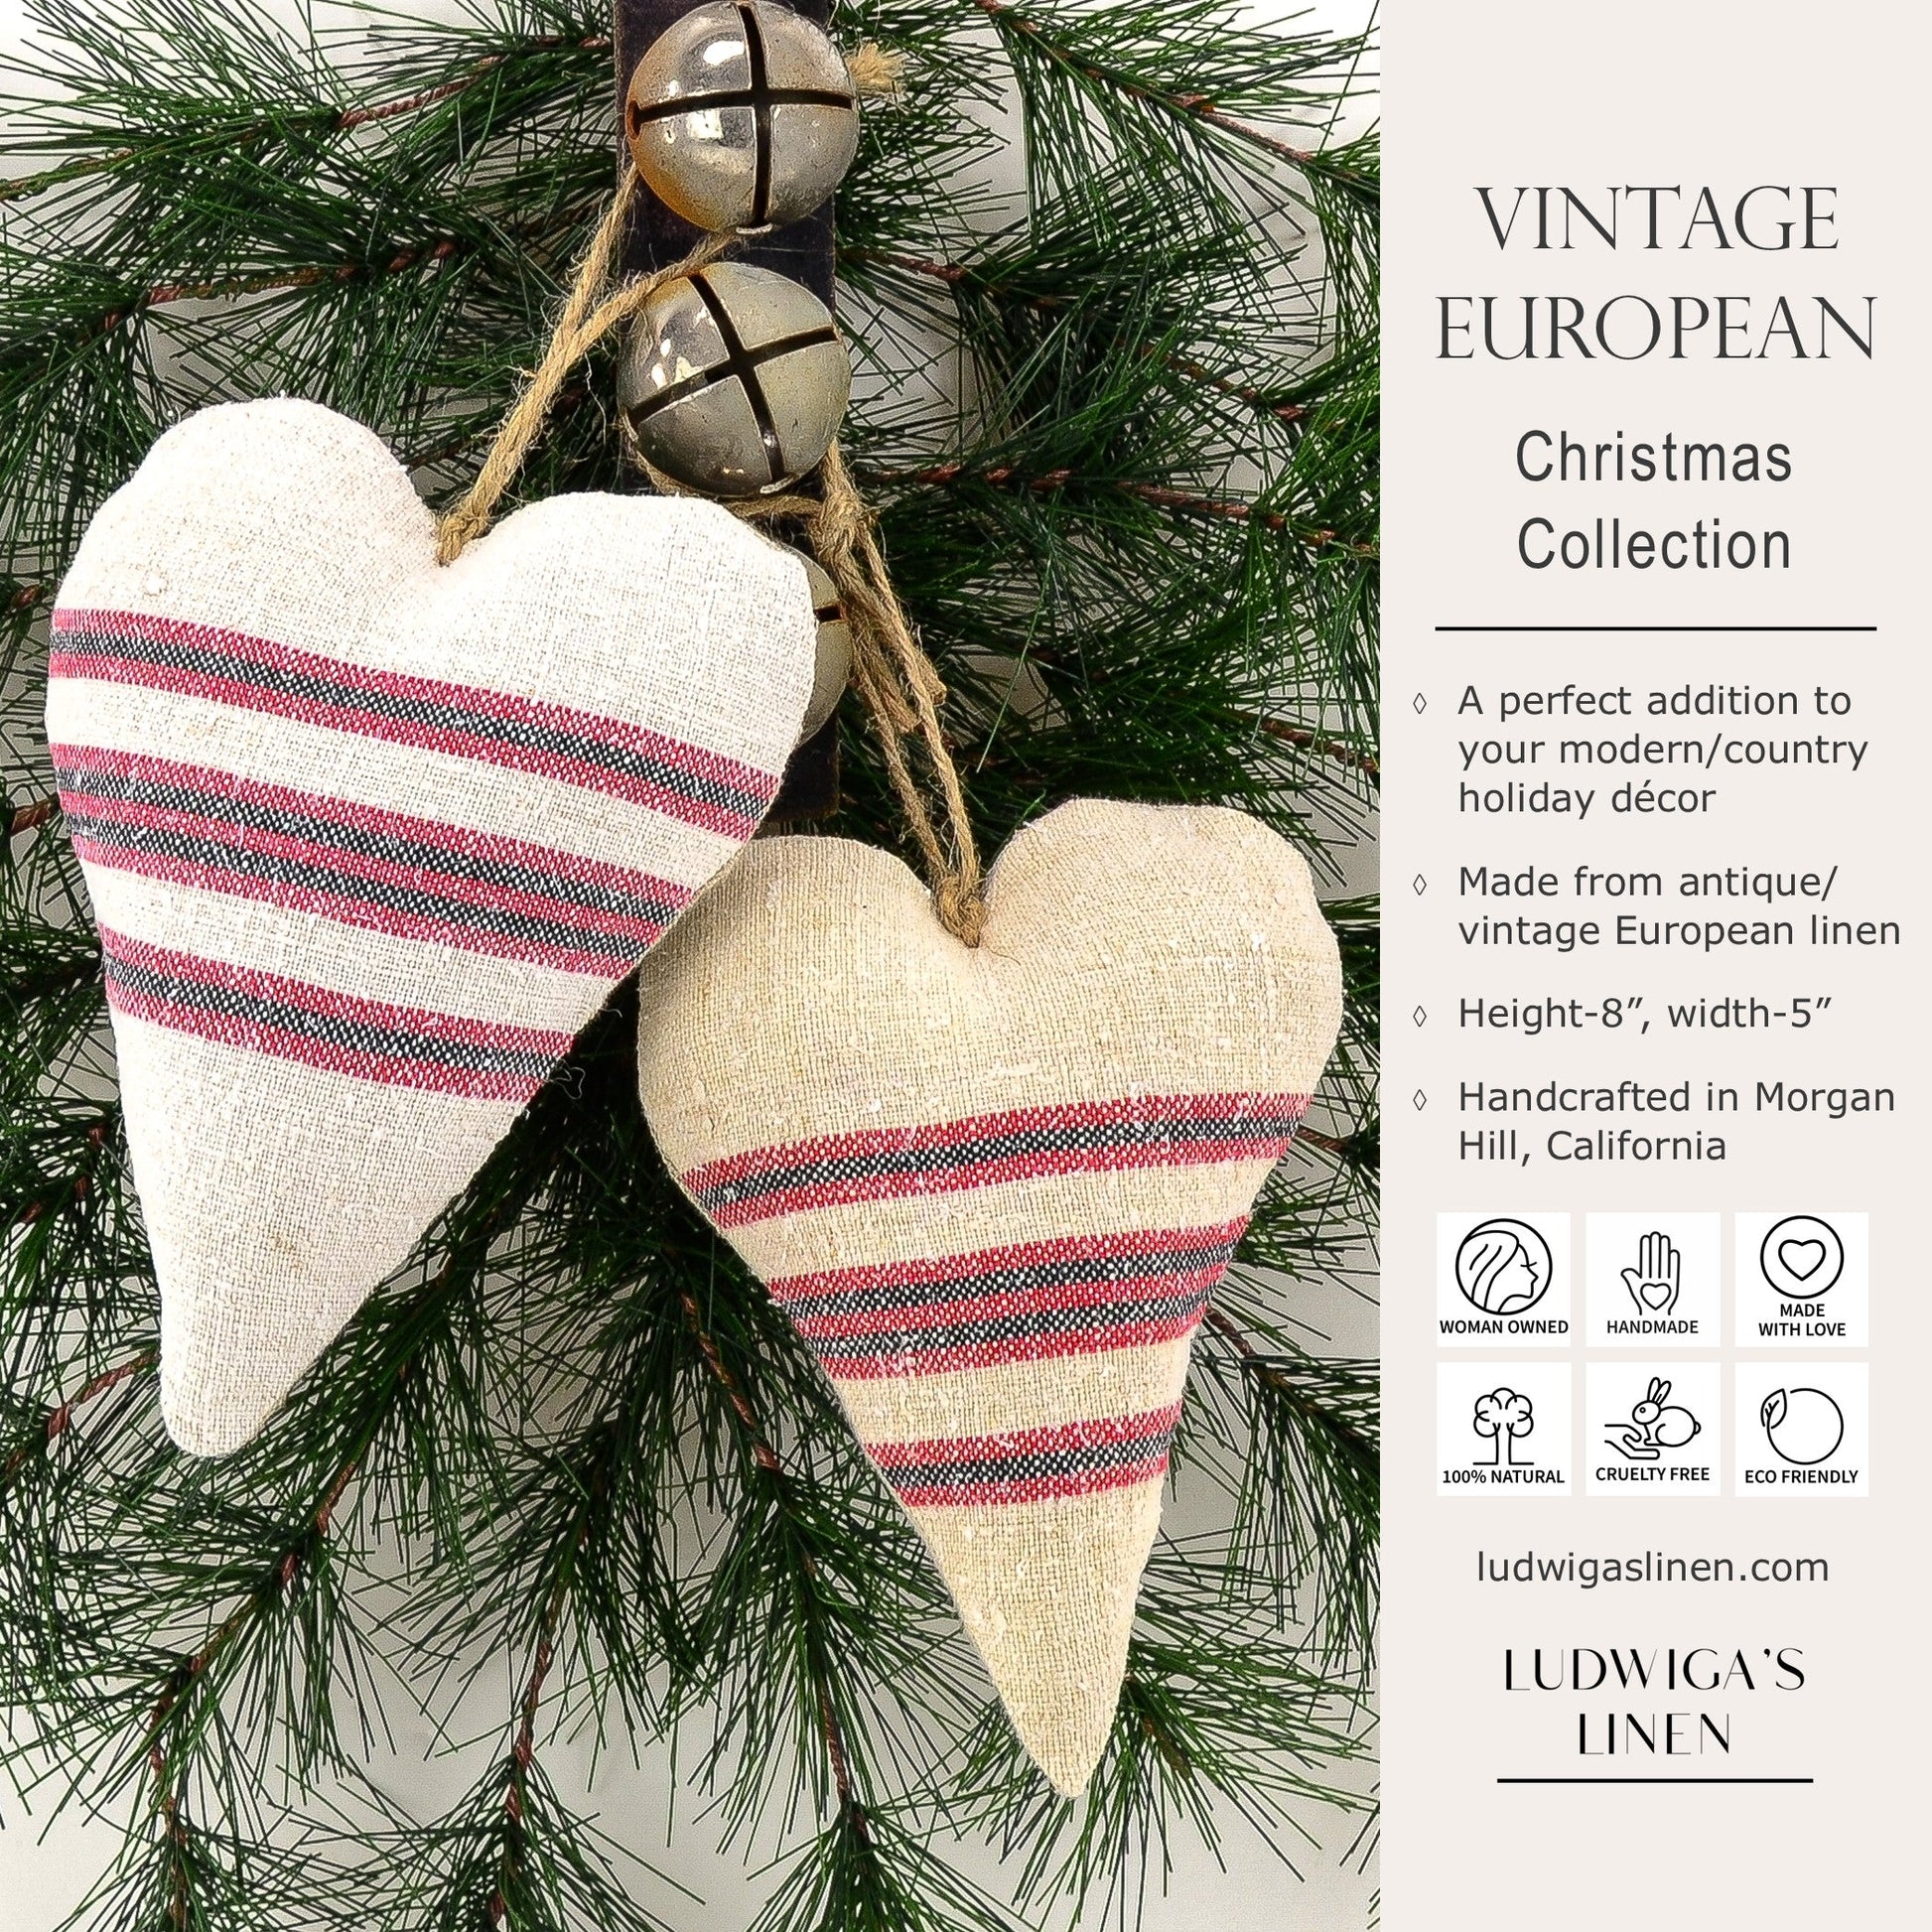 Christmas/holiday ornament - two antique European grain sack linen hearts fastened together with twine